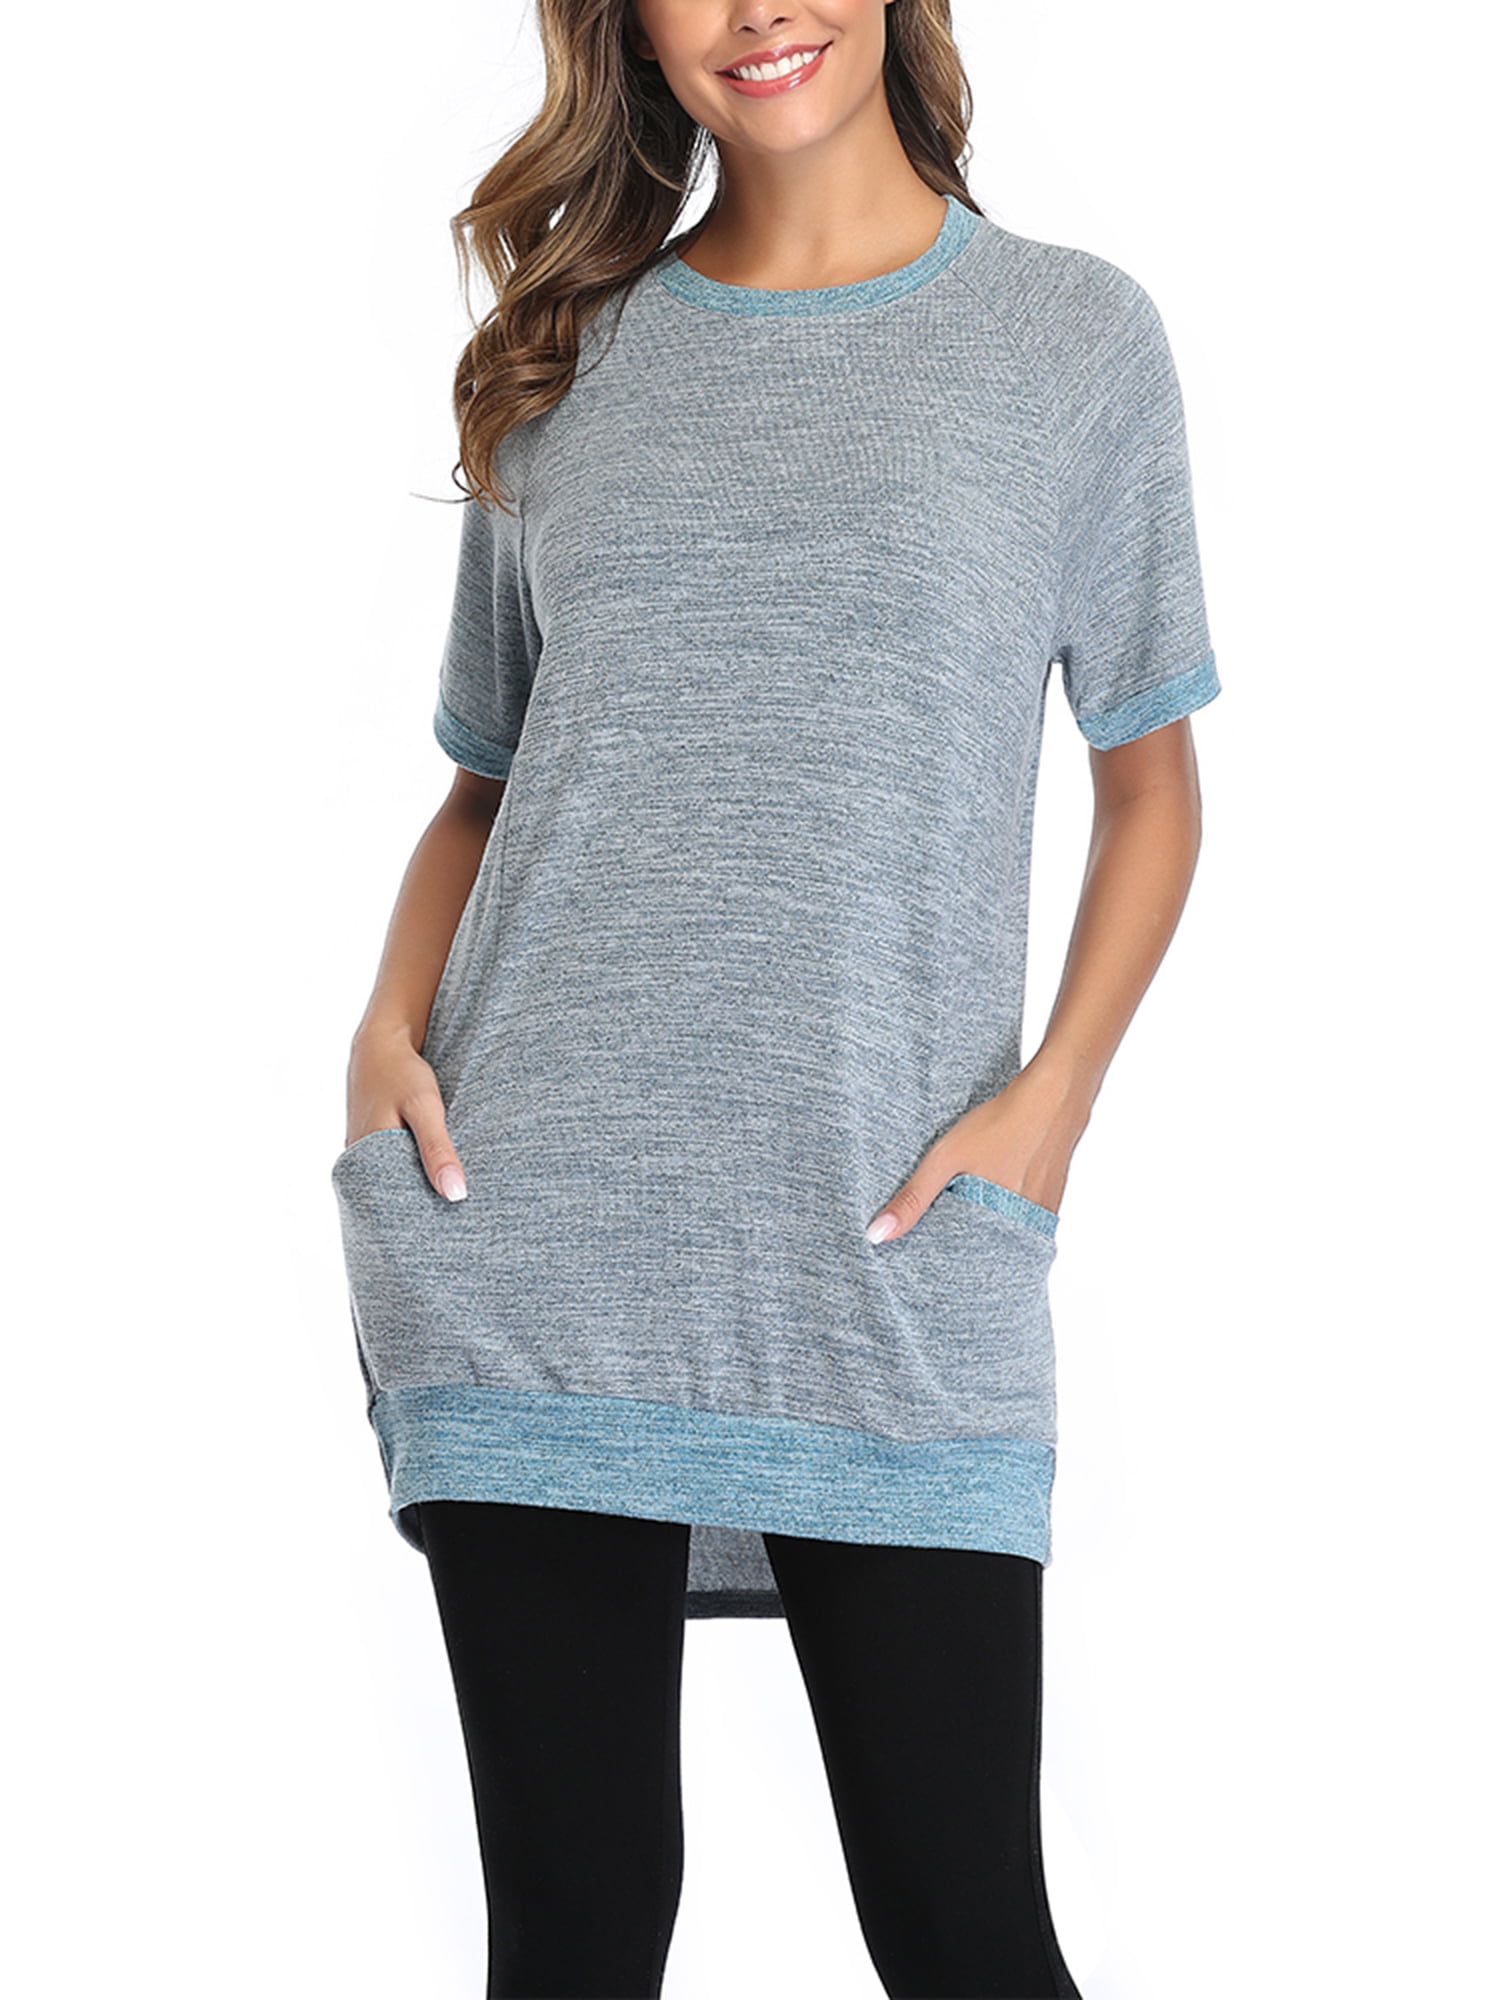 Short Sleeve Pocket T Shirt for Women Casual Summer Color Block Tunic ...